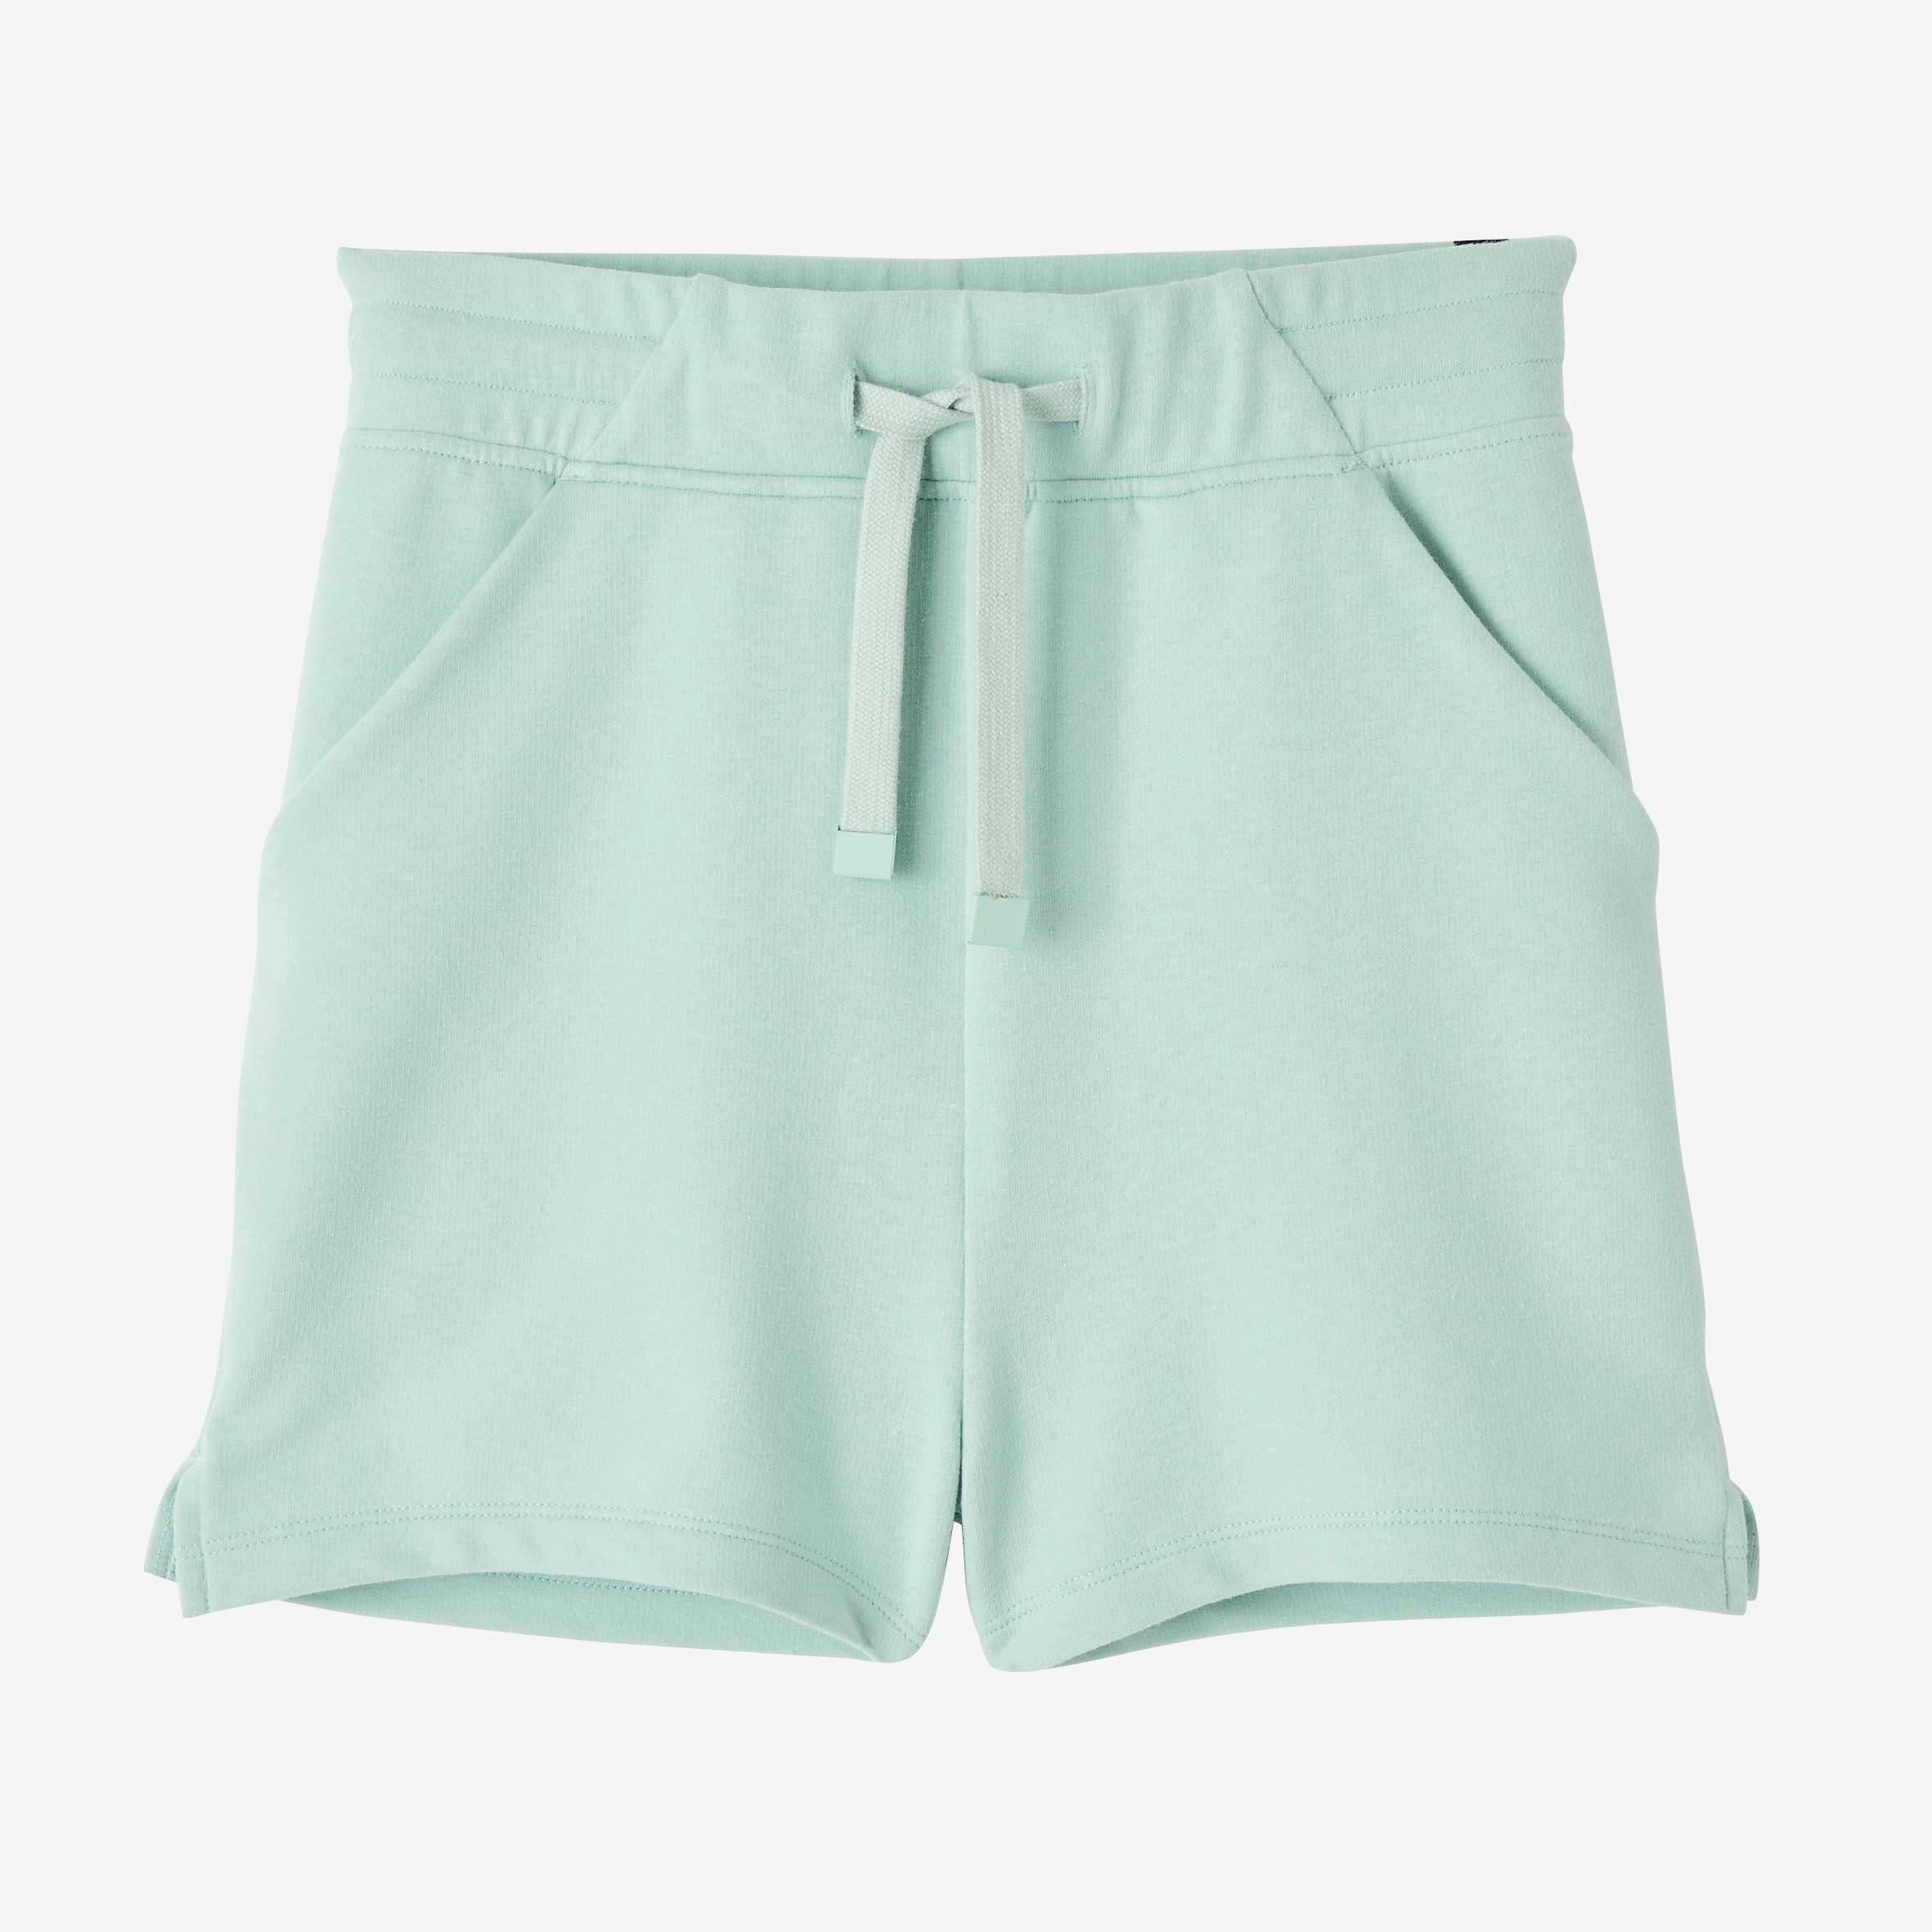 Women's Fitness Cotton Shorts with Pocket 520 - Light Green 6/6